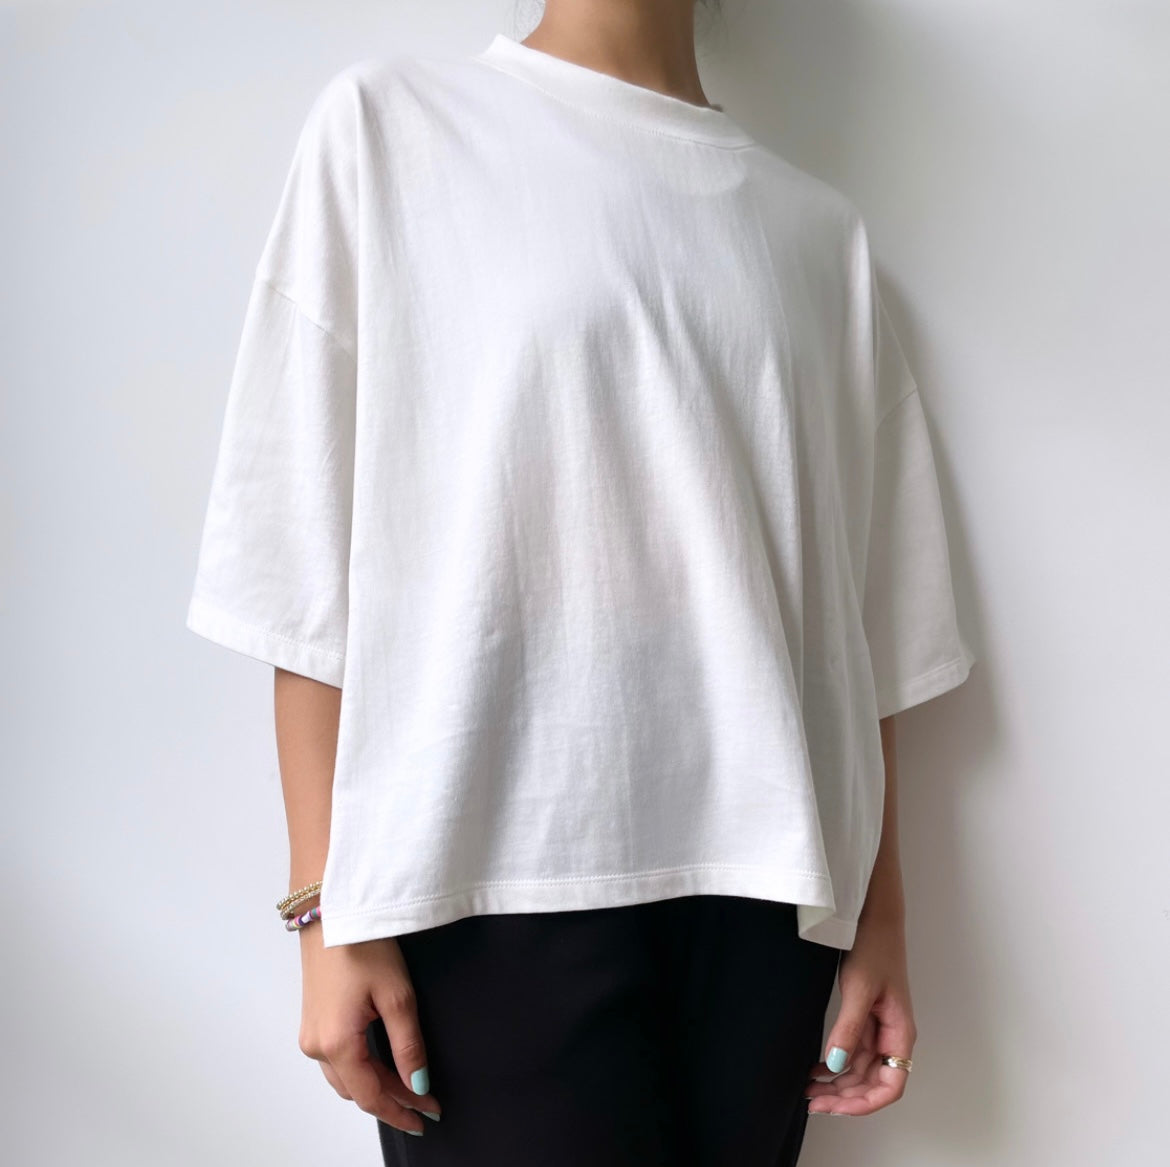 The Boxy Crop Tee in White